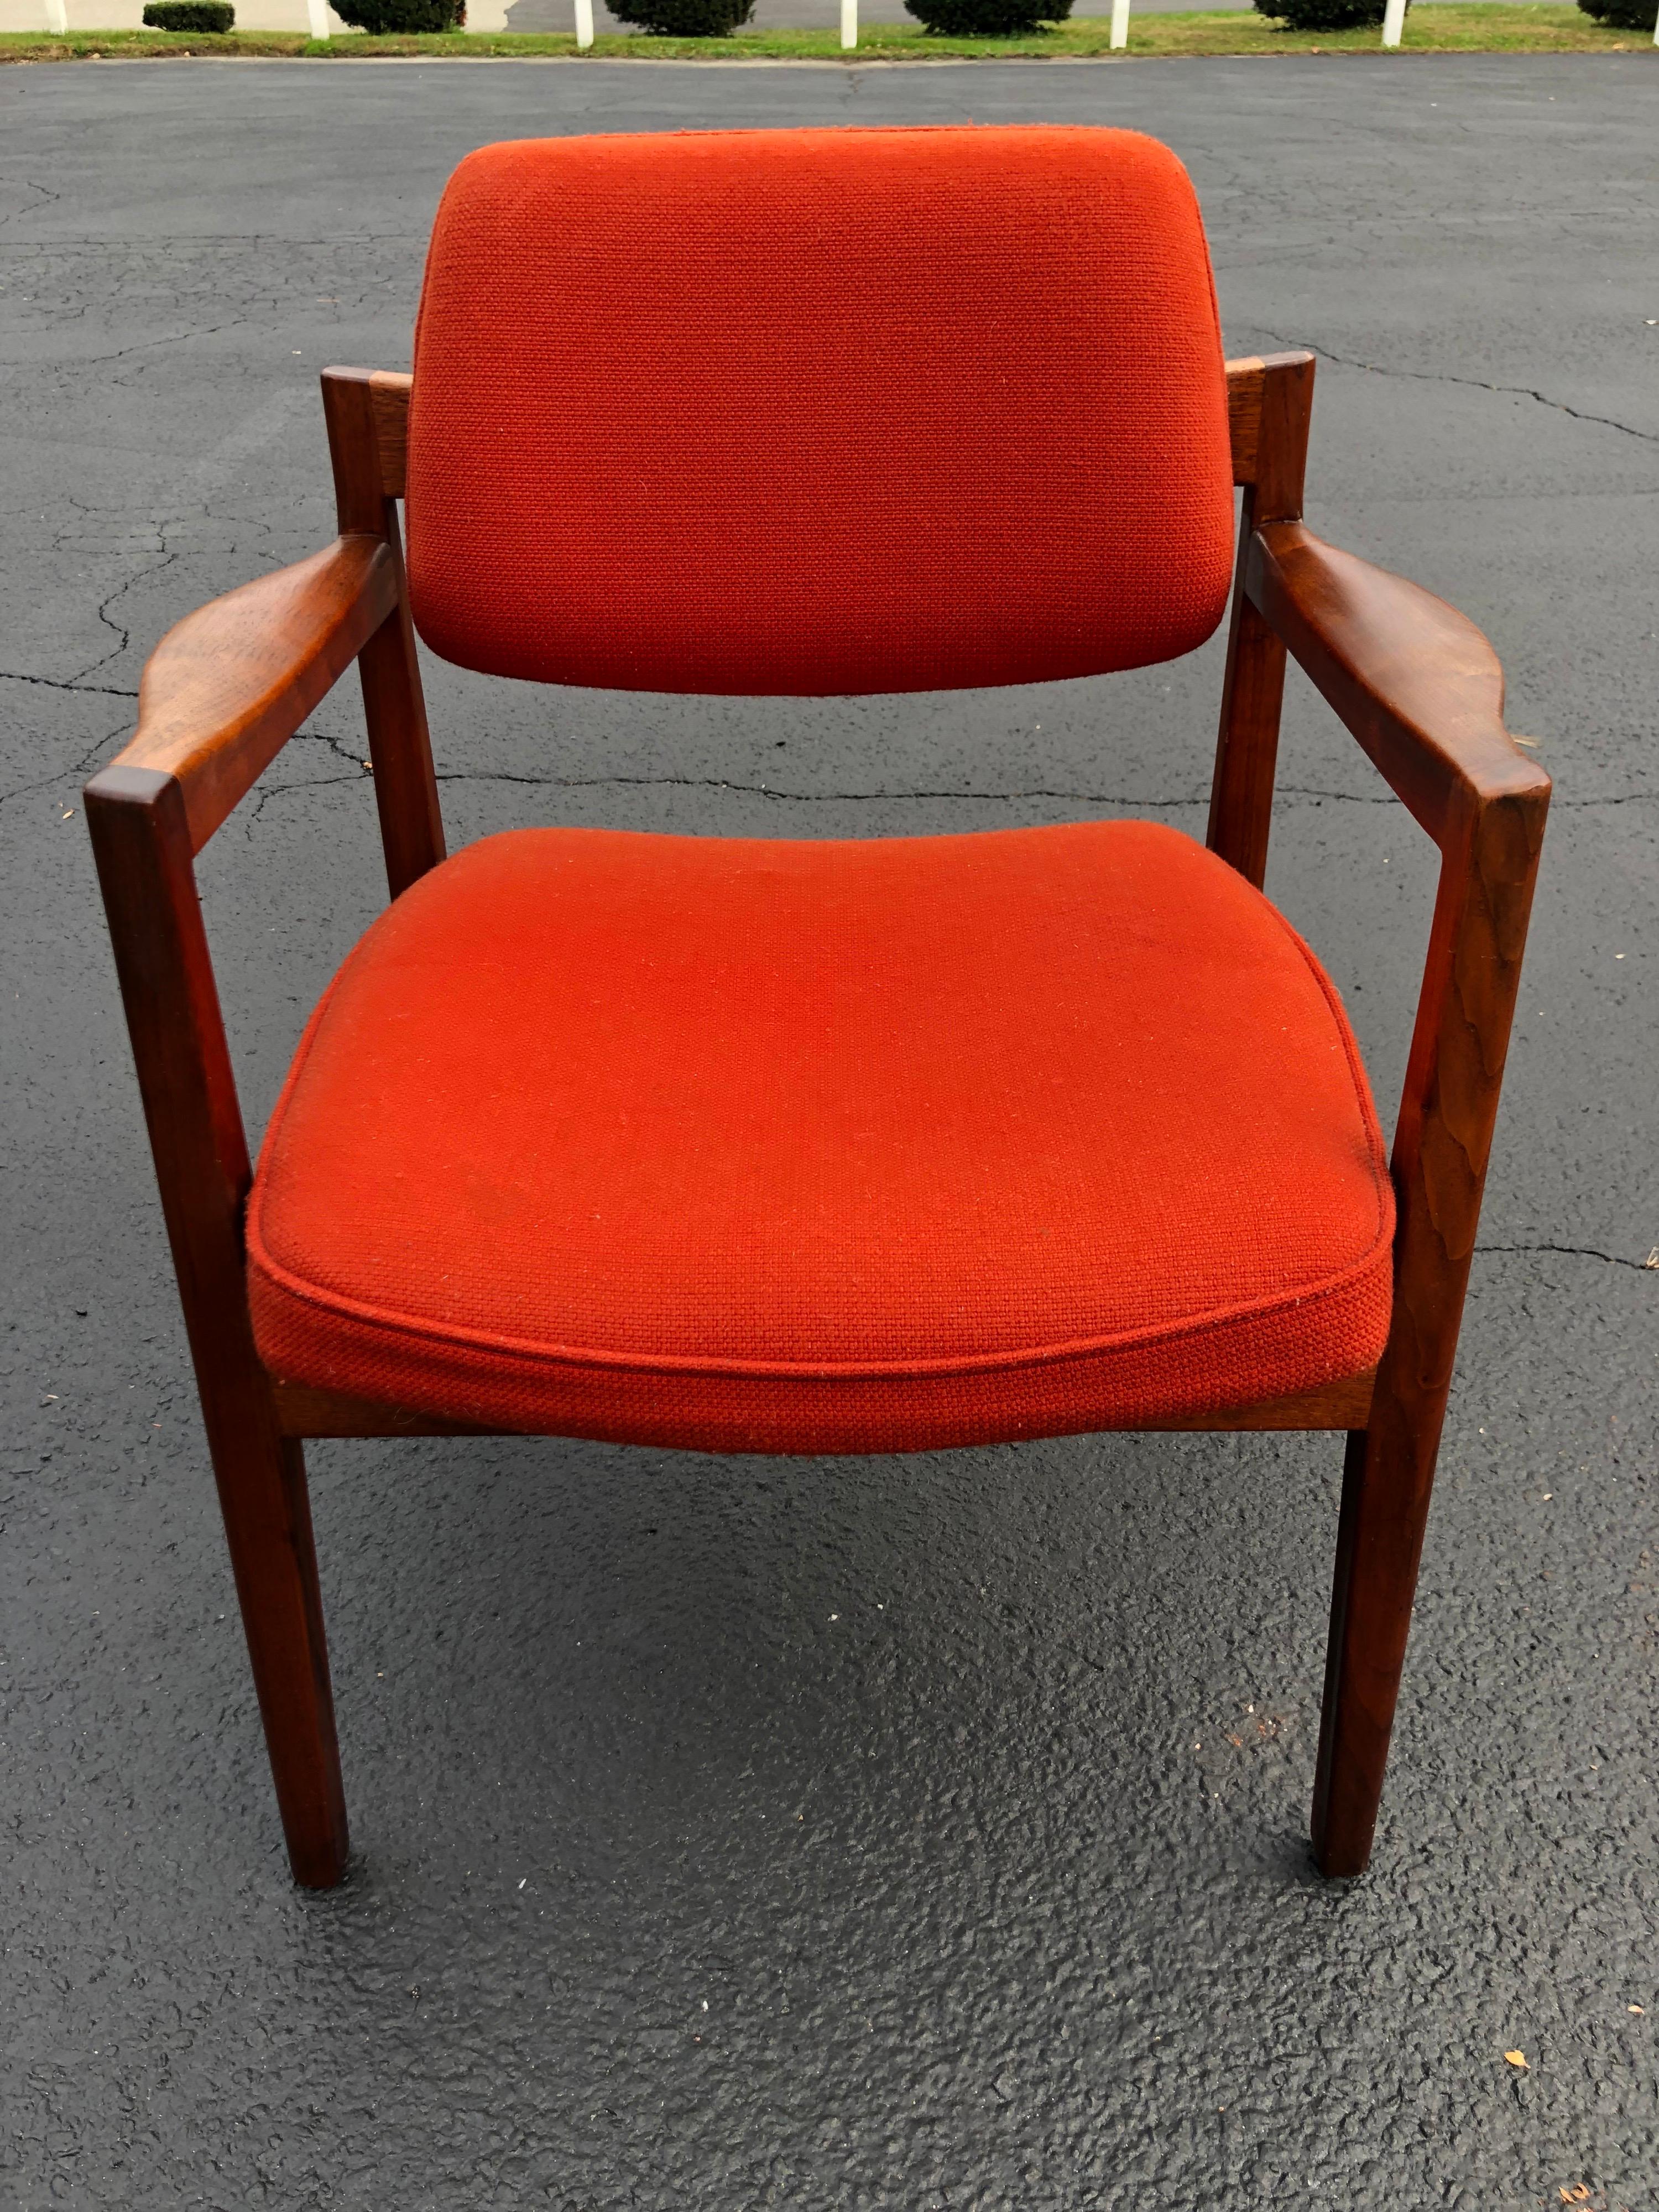 Walnut armchair in the style of Jens Risom. Classic Danish modern lines with rich patina to the curved wood. Original mid Century upholstery is a gorgeous original burnt orange rust hopsack. Amazing lines to this chair. There is a hardening to the